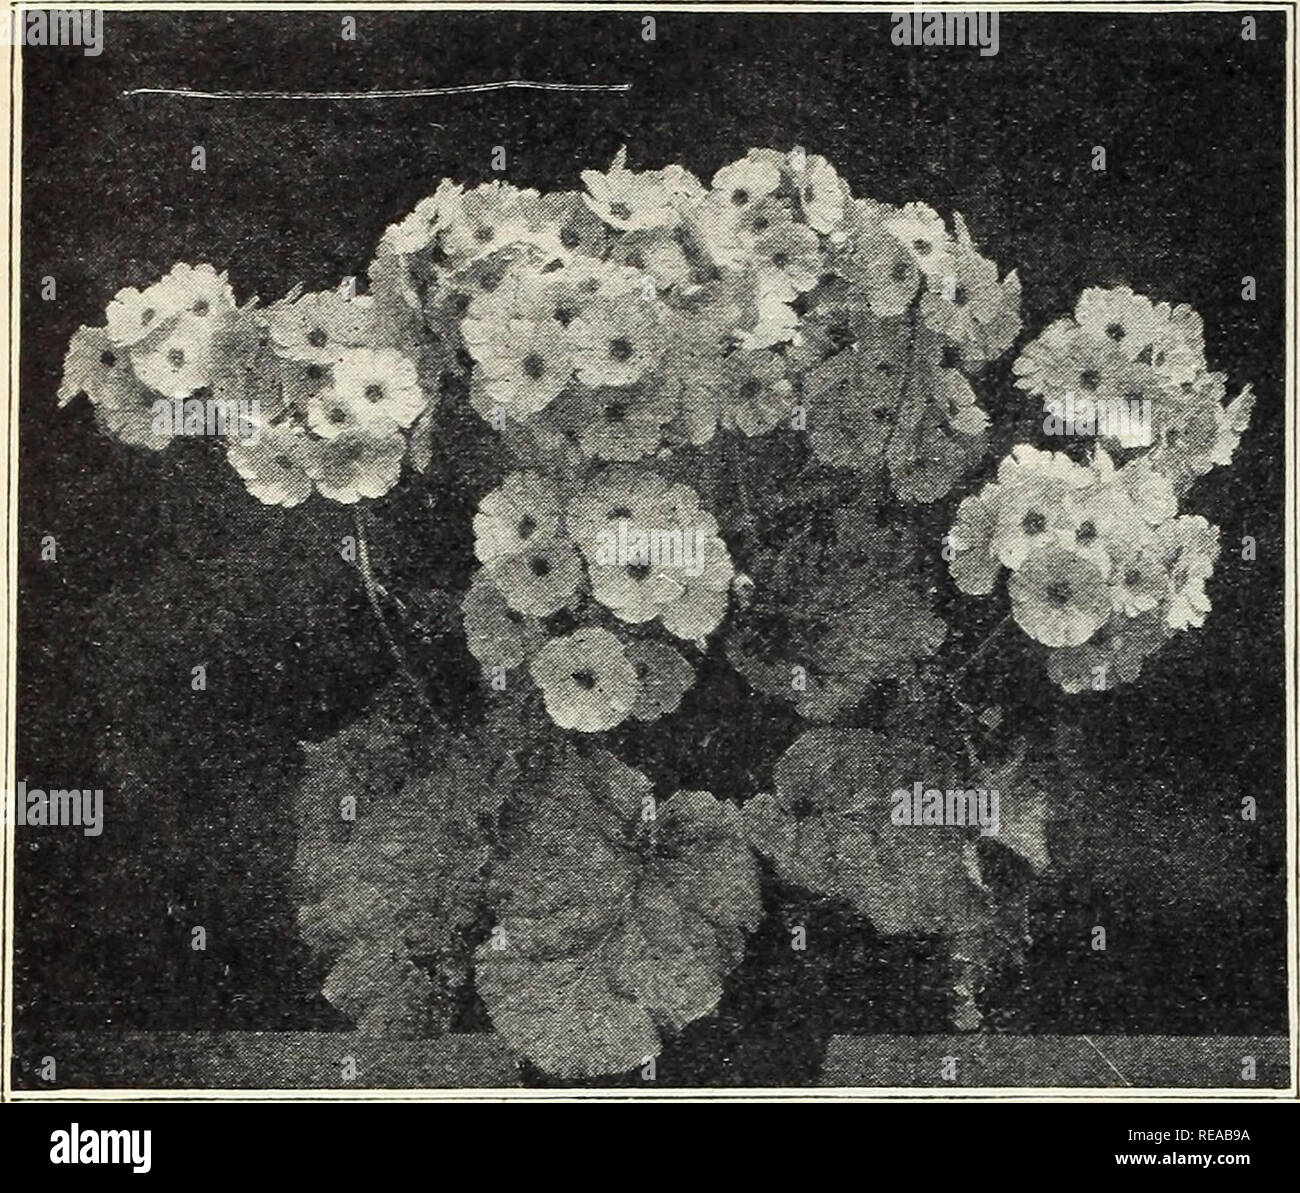 . Dutch bulbs for spring blooming. Seeds Catalogs; Flowers Seeds Catalogs; Bulbs (Plants) Seeds Catalogs; Nurseries (Horticulture) Catalogs. 32 Florists' Price List — Fall 1928 — The W. W. Barnard Co., 3942 S. Federal St., Chicago. PRIMULA FRINGED CHINESE PRIMROSES Chiswick Red Rose T. Pkt. Crimson King- True Blue Salmon White Pink Separate Colors....$0.75 Mixed Fringed 0.50 PRIMULA. OBCONICA VARIETIES (Arend's Strain— Grandiflora Alba „ 75 Apple Blossom 75 Kermesina, Crimson „ 75 Rosea 75 Pure White 75 Obconica, mixed 75 Fire Queen 75 Gigantea Apple Blossom 1.00 Kermesina 1.00 Rosea - 1.00 Mi Stock Photo